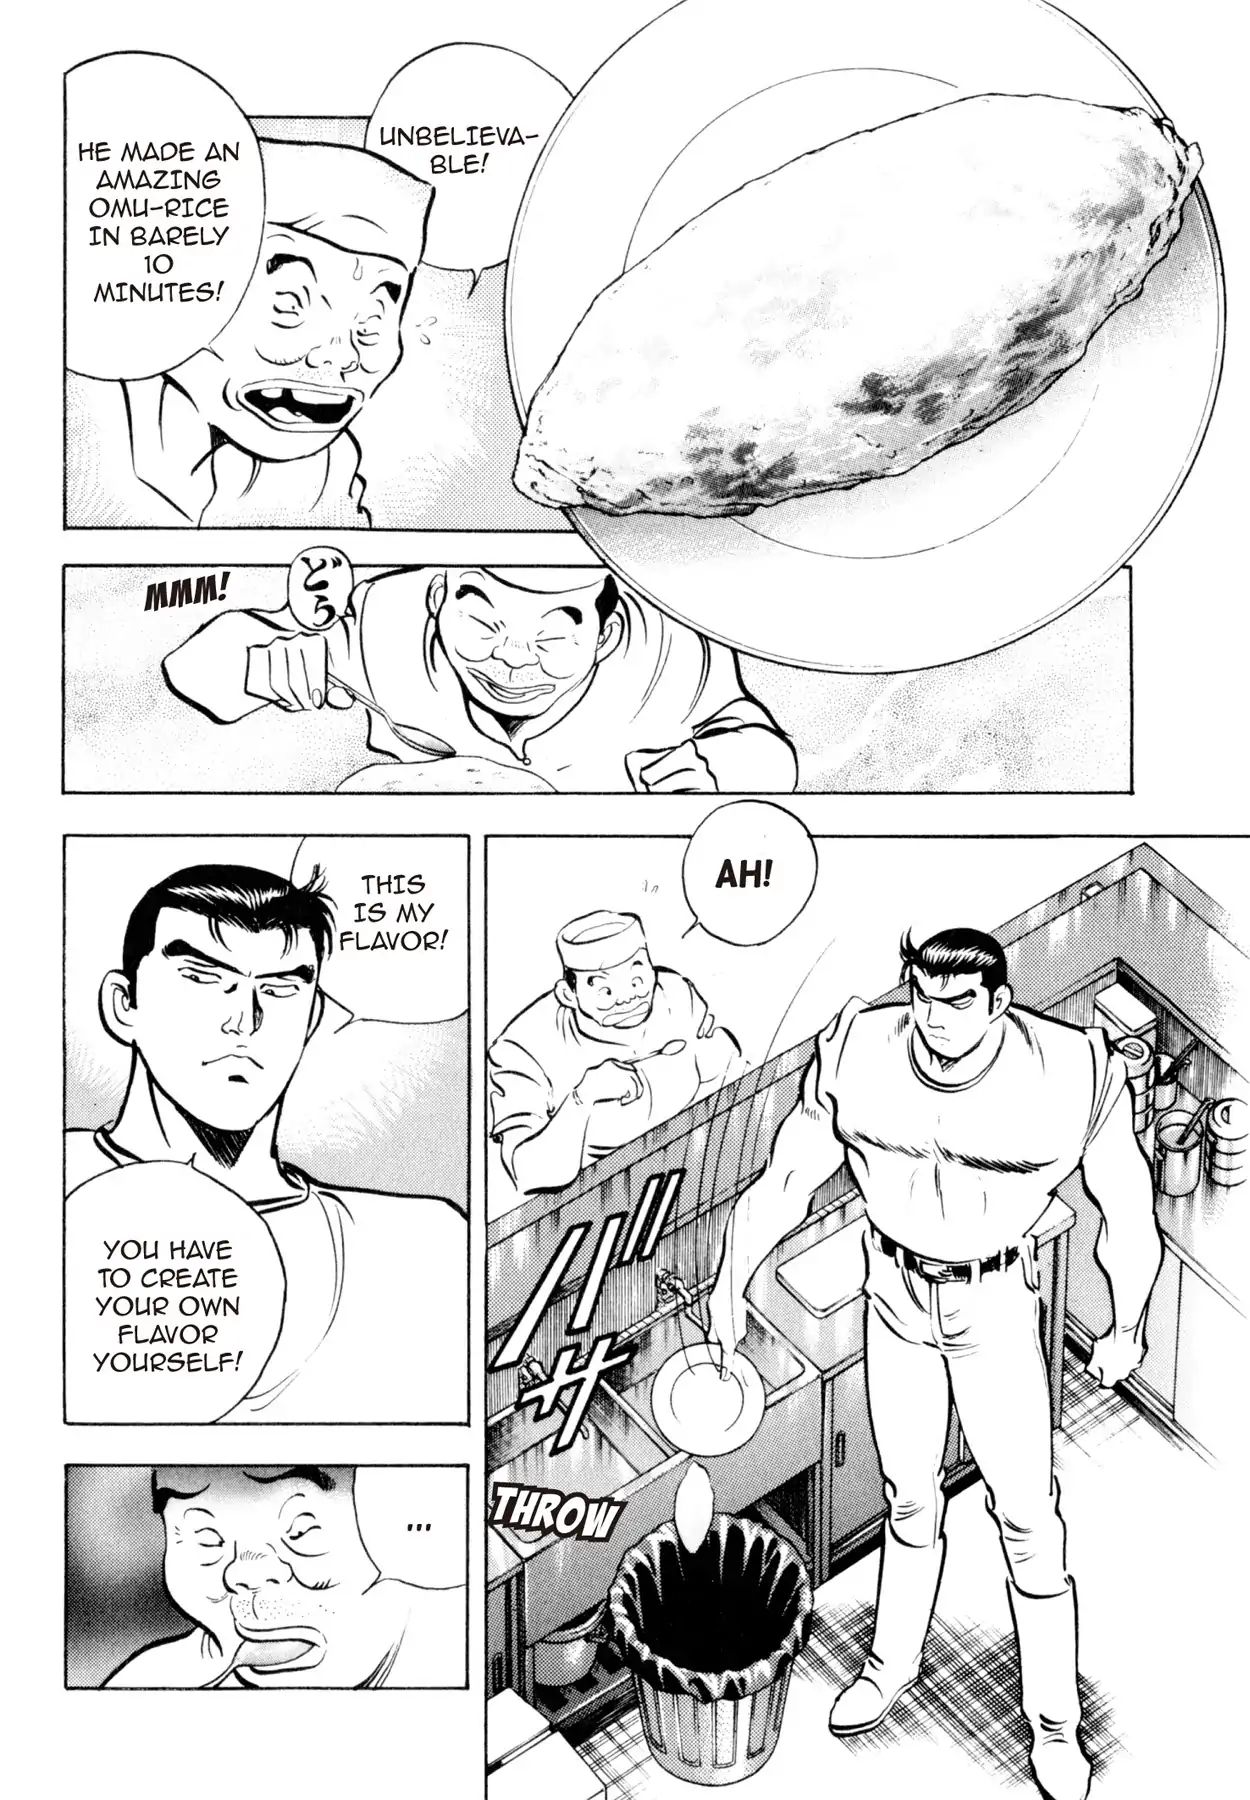 Shoku King VOL.1 CHAPTER 6: THE STUBBORN CHINESE RESTAURANT